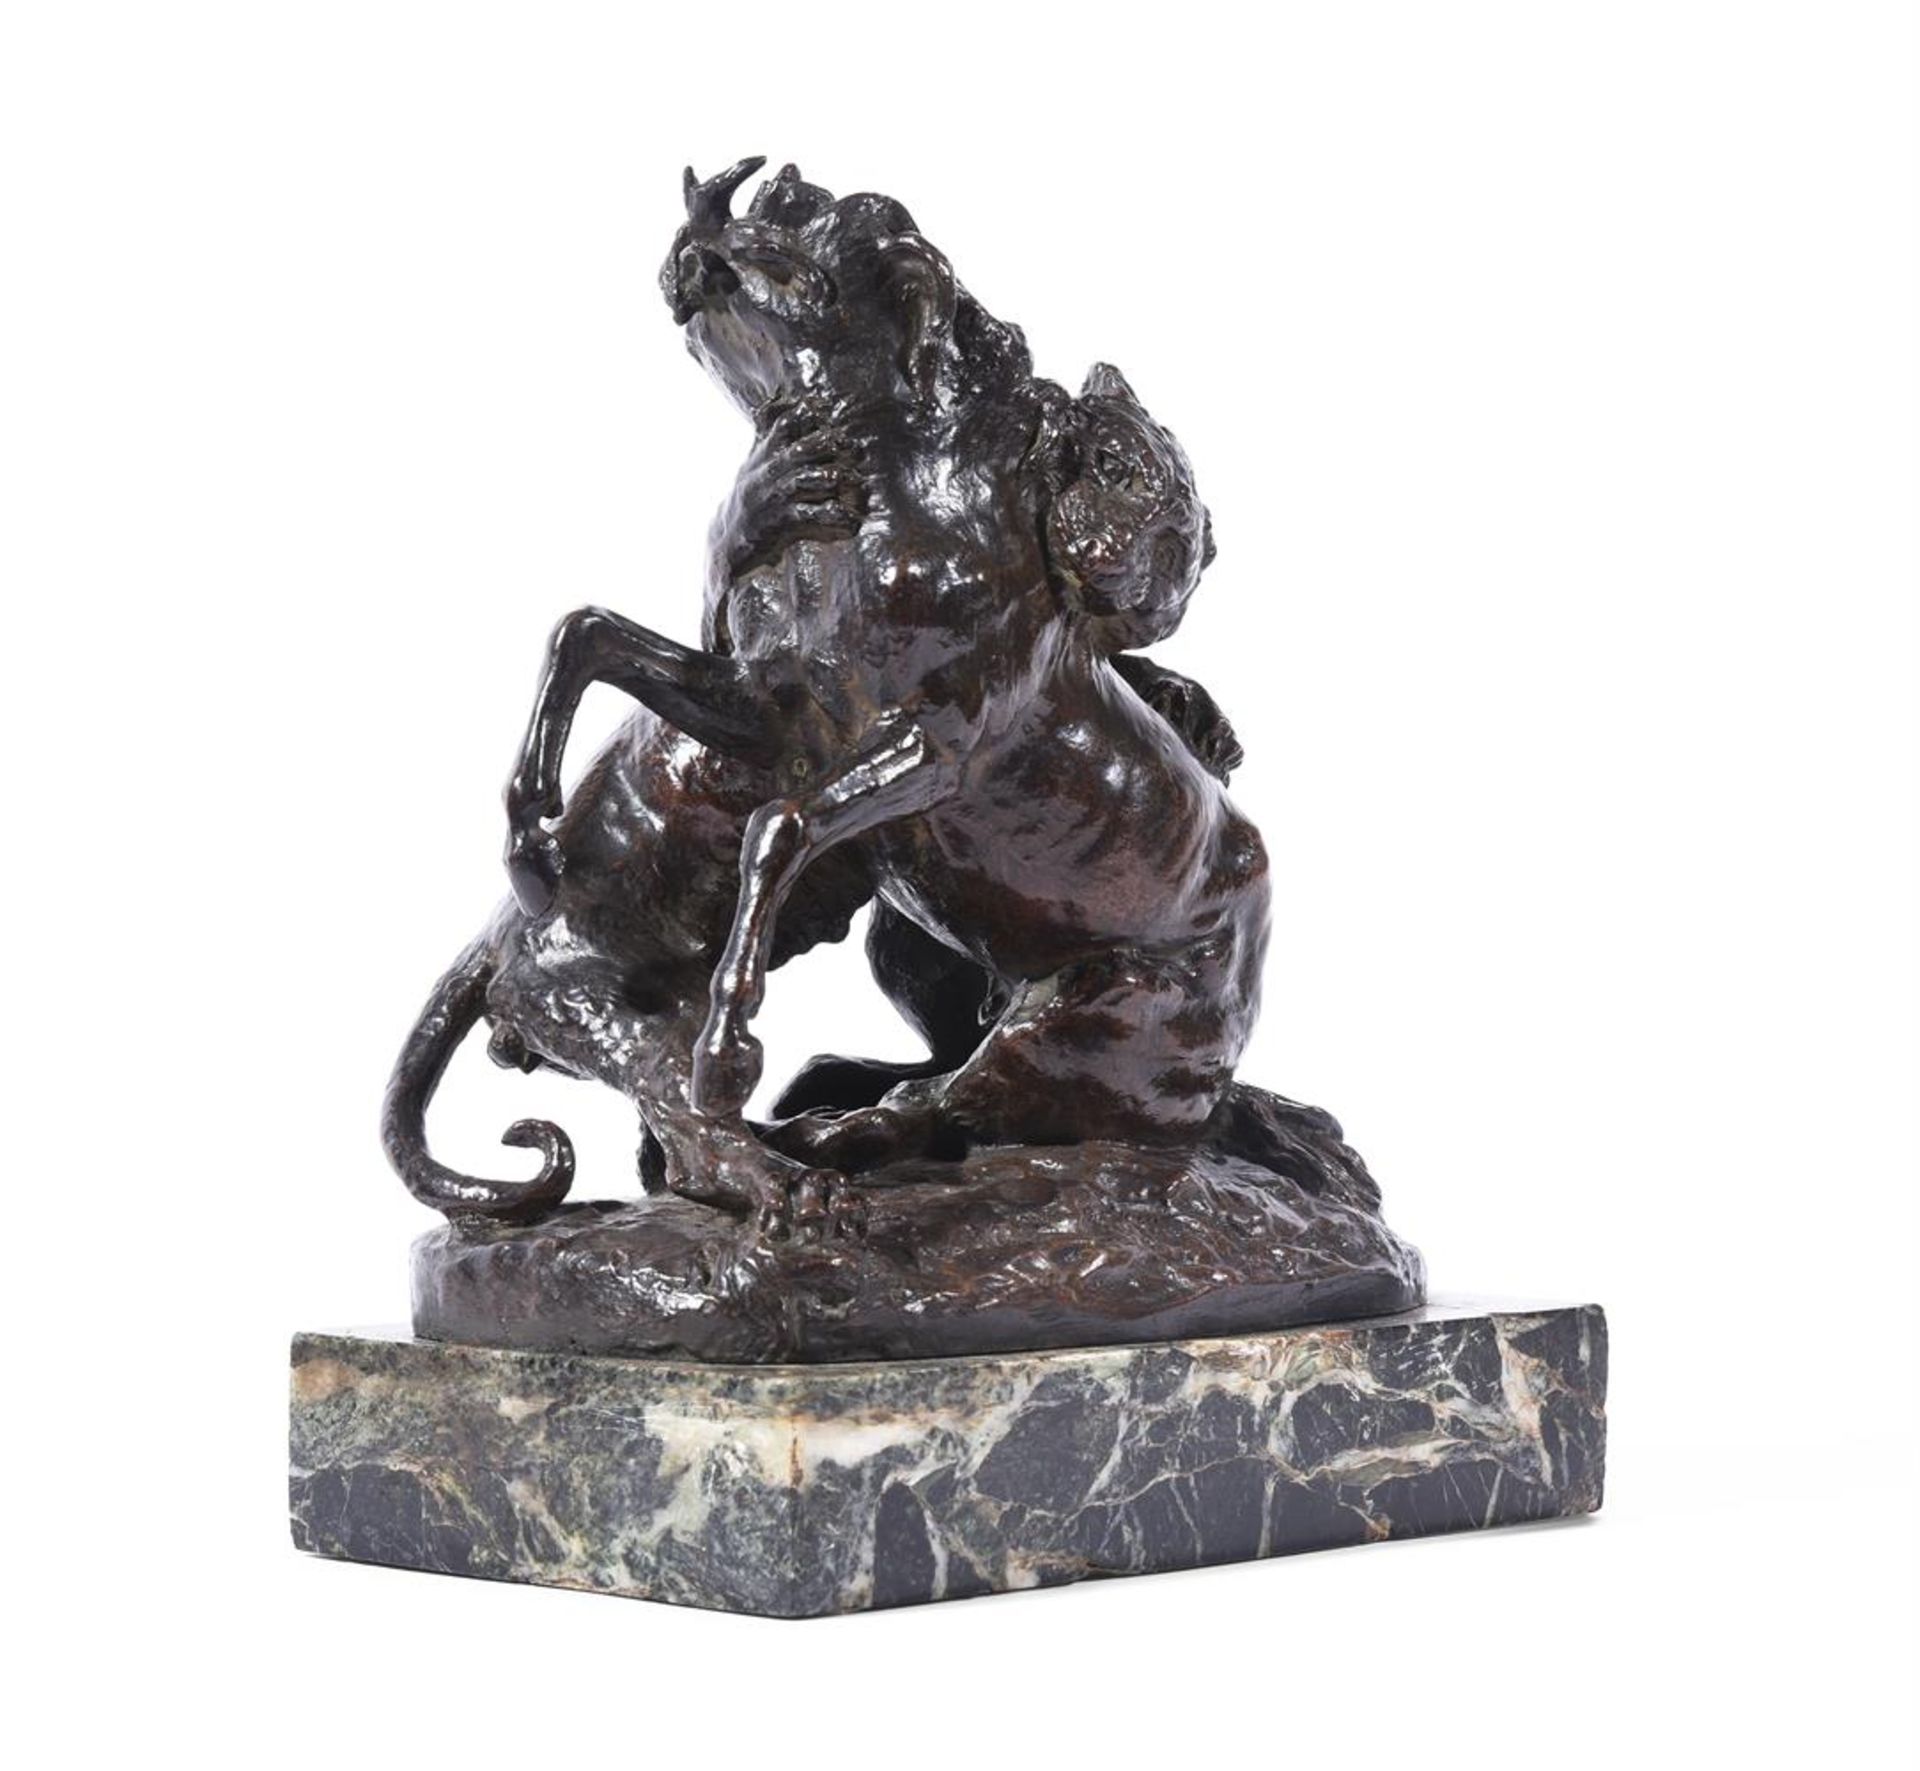 AFTER CHRISTOPHE FRATIN- A BRONZE GROUP OF A HORSE ATTACKED BY A TIGER FRENCH